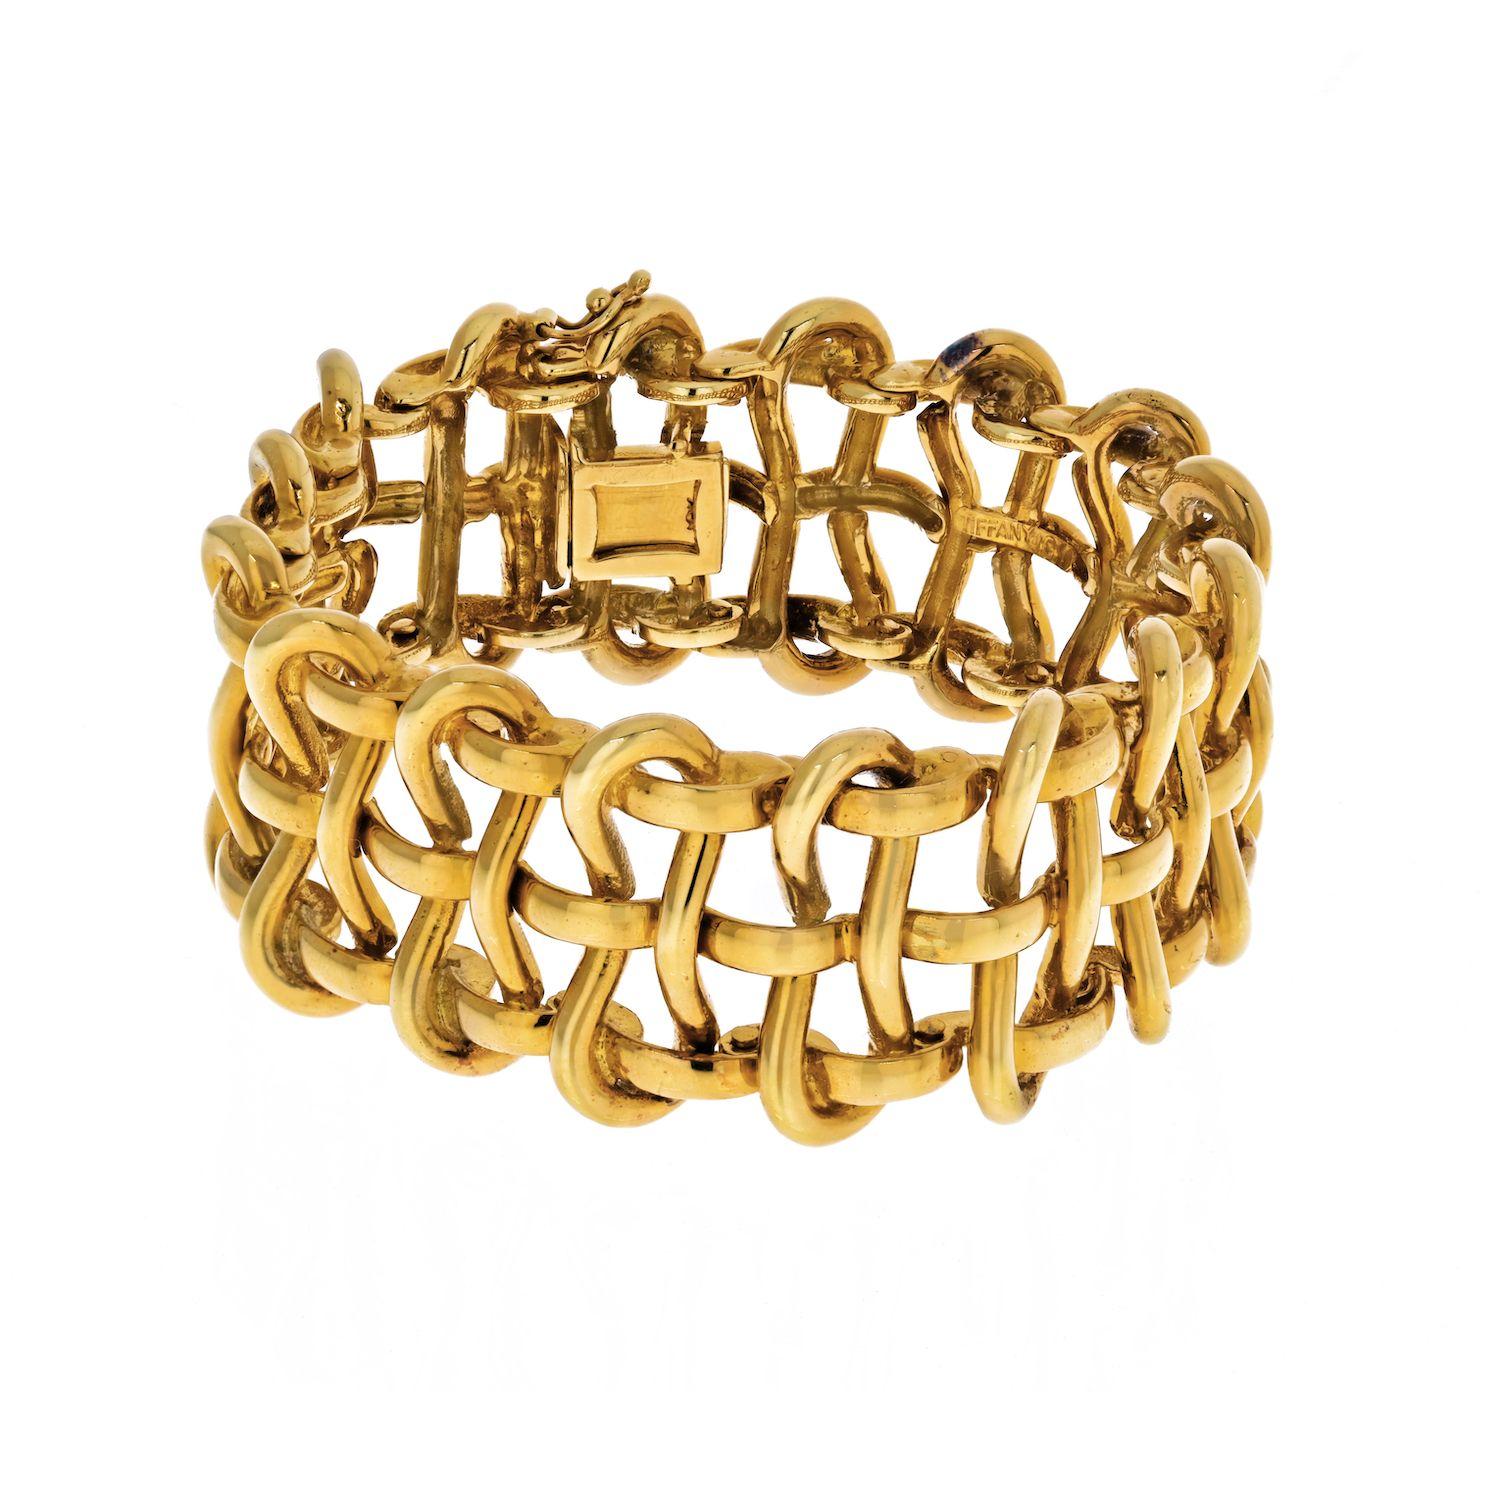 This striking piece by Tiffany & Co this yellow gold open wire bracelet is both timeless and bold. You can#t find a more classic piece of jewelry than a vintage gold bracelet from Tiffany & Co. This Mid-Century Tiffany & Co offering has a